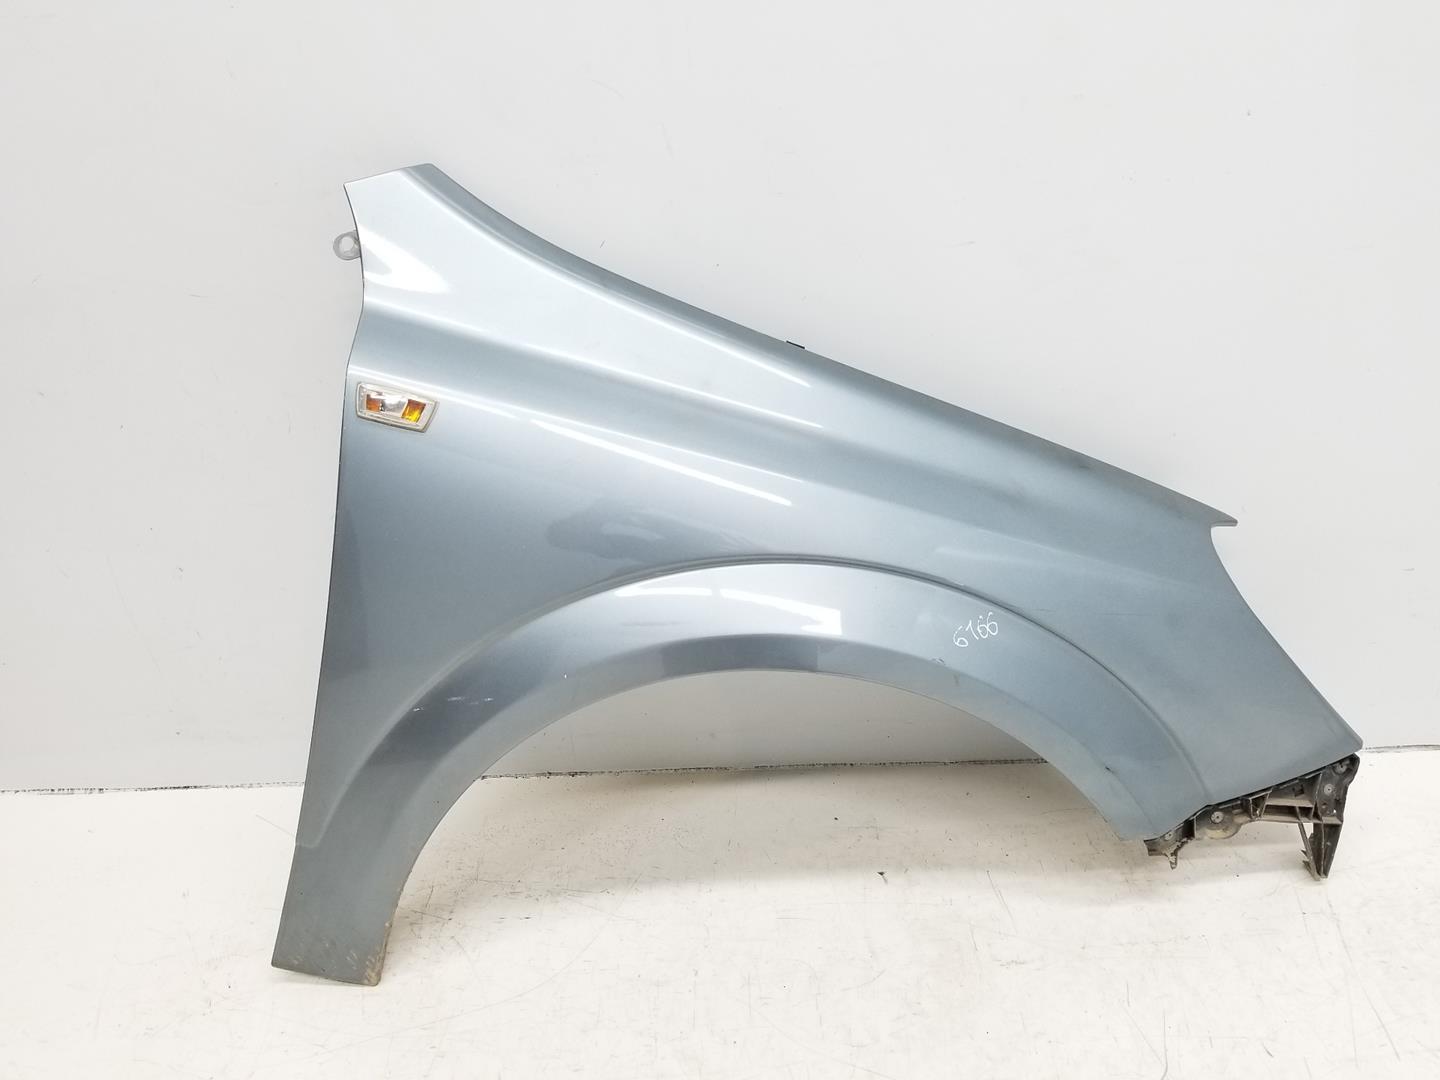 OPEL Astra J (2009-2020) Front Right Fender 93178667, 93178667, COLORPLATA 24168672